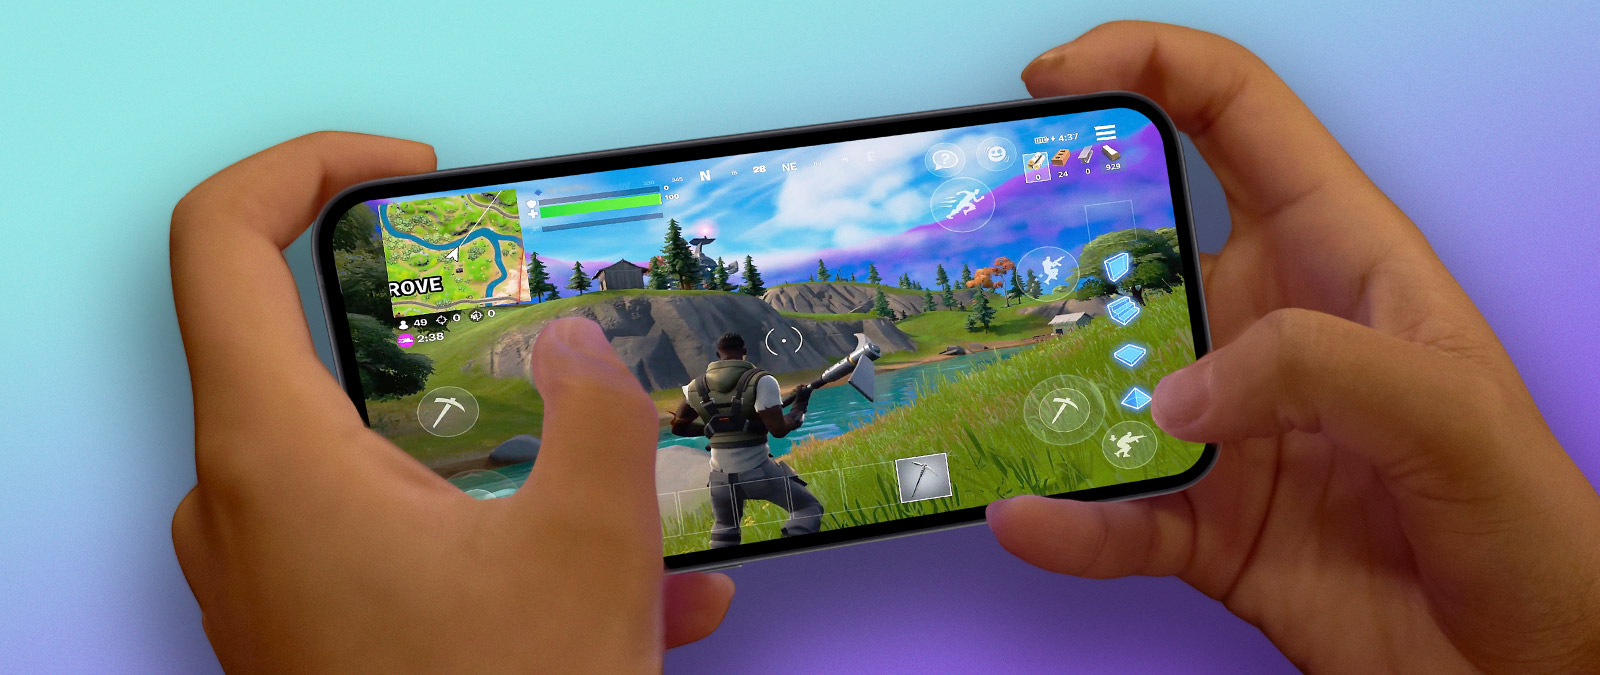 A person plays Fortnite on a smart phone, using touch controls.